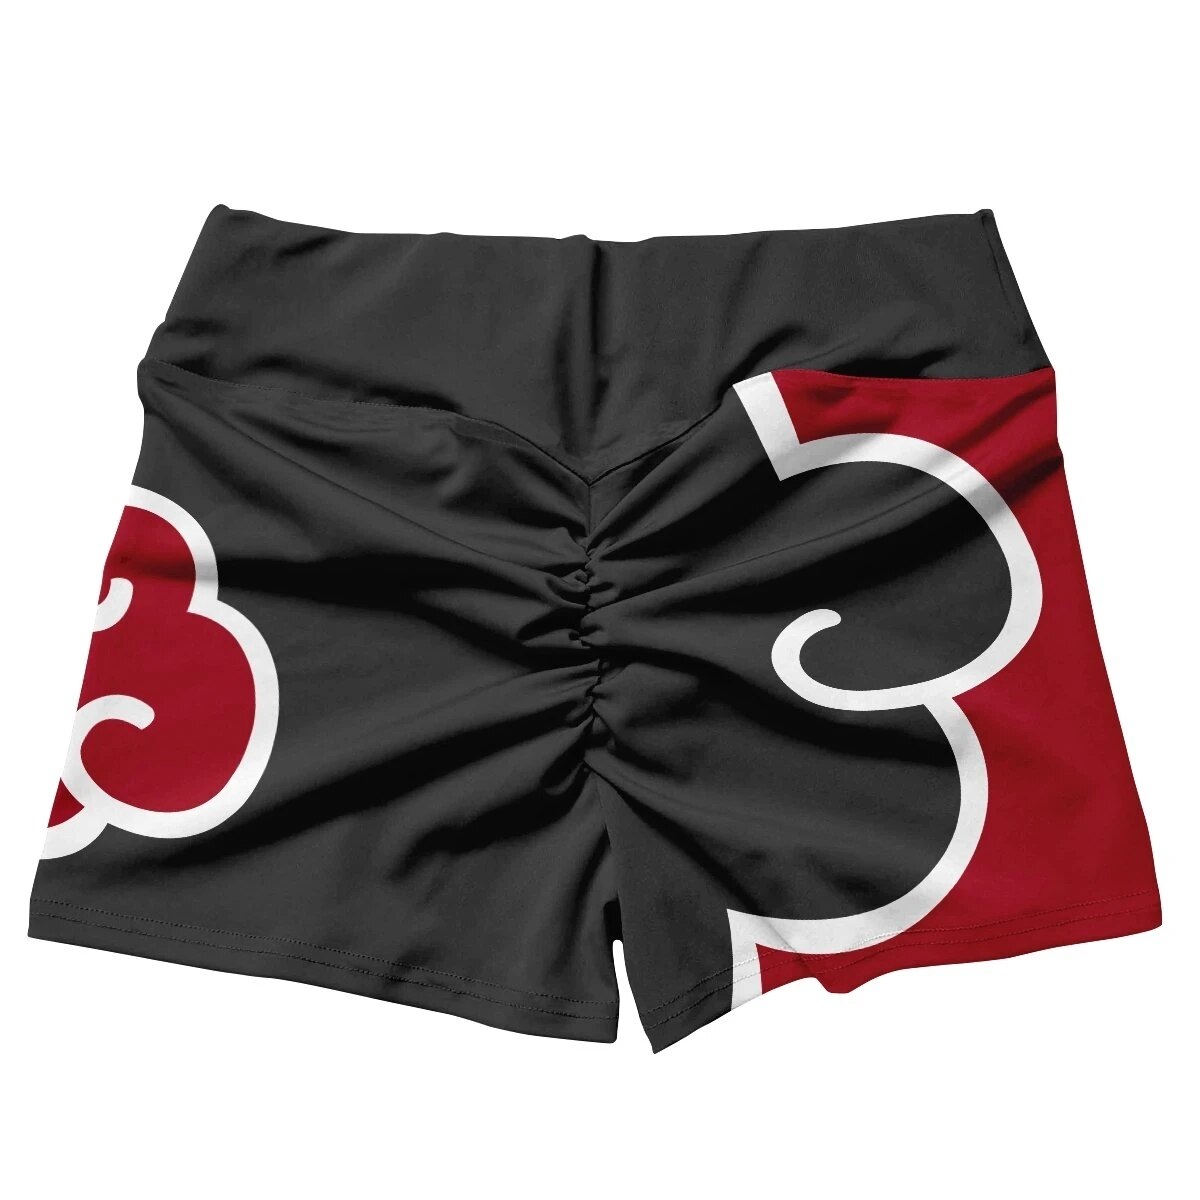 Naruto – Akatsuki Themed Cool Complete Swimsuit (Different Sizes) Pants & Shorts